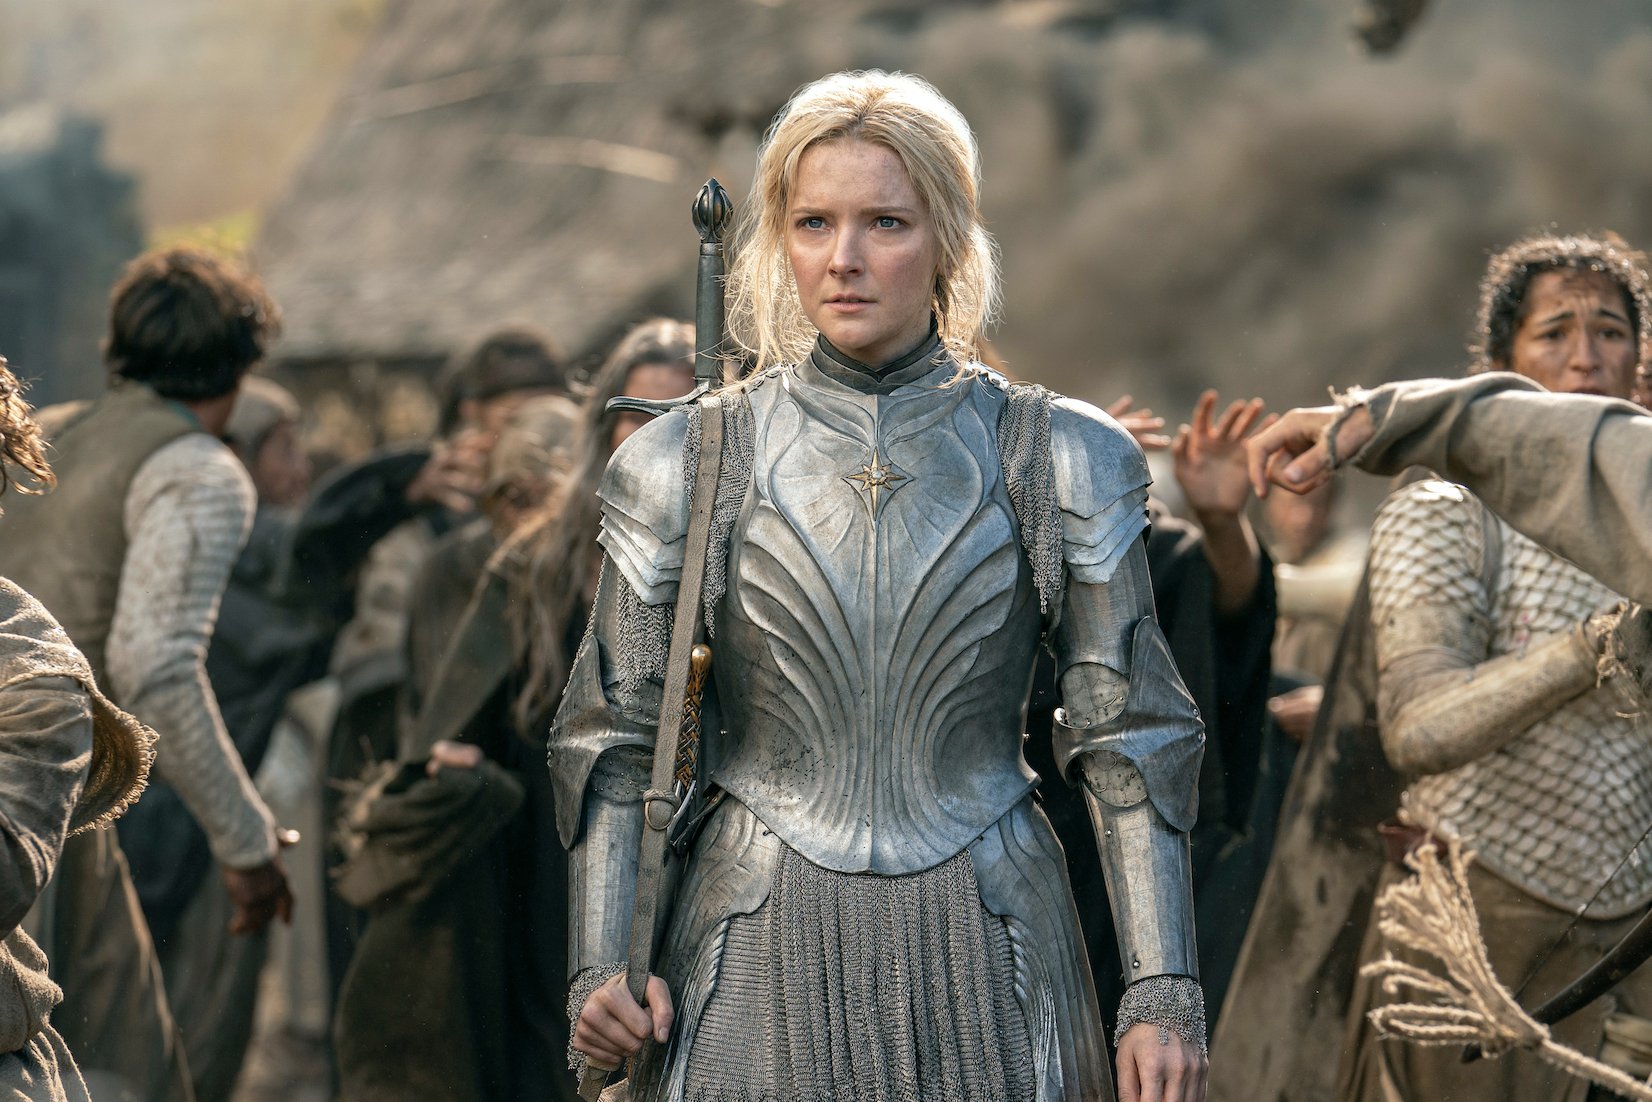 ‘the Rings Of Power’ Galadriel Actor Morfydd Clark Speaks Out Against Diversity Backlash